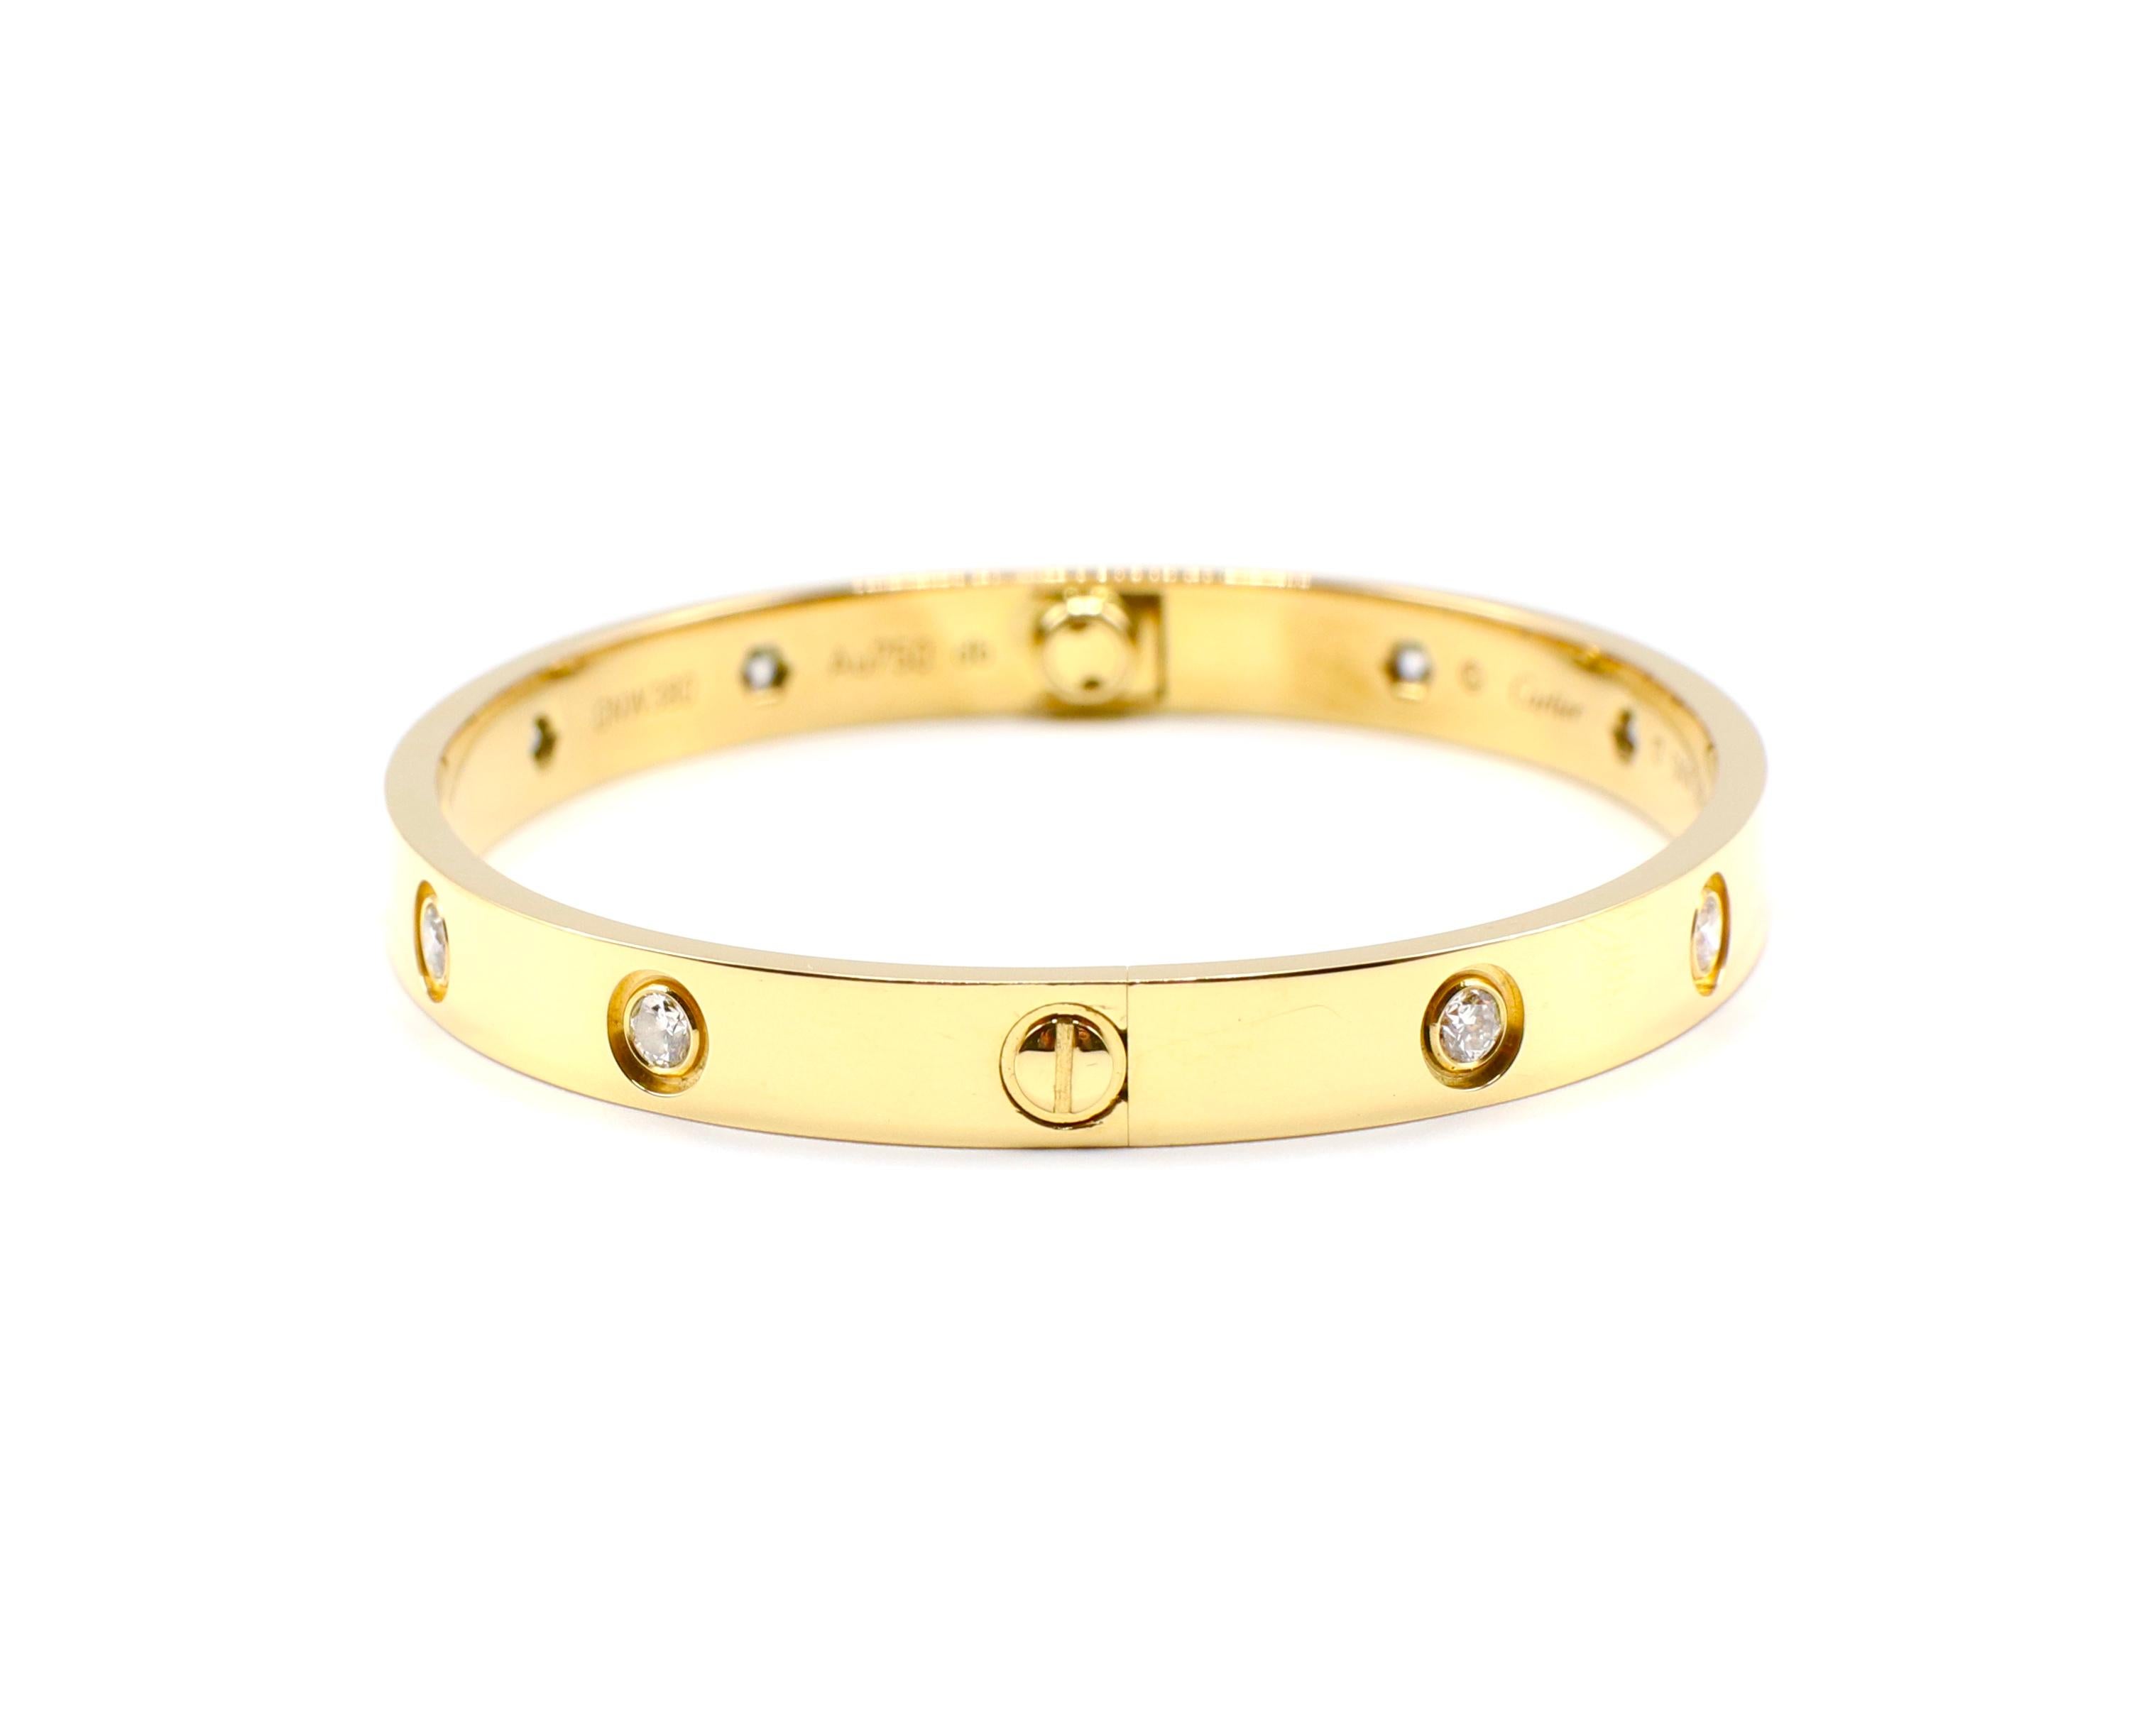 Cartier 18K Yellow Gold 10 Diamond Love Bracelet Size 17 Box & Papers

Metal: 18K Yellow Gold 750
Weight: 31.41 grams
10 Round Brilliant Cut Diamonds, .96 ctw G VS 
Size 17
Width: 6.1mm
Includes screwdriver, Cartier box, and papers & booklet as